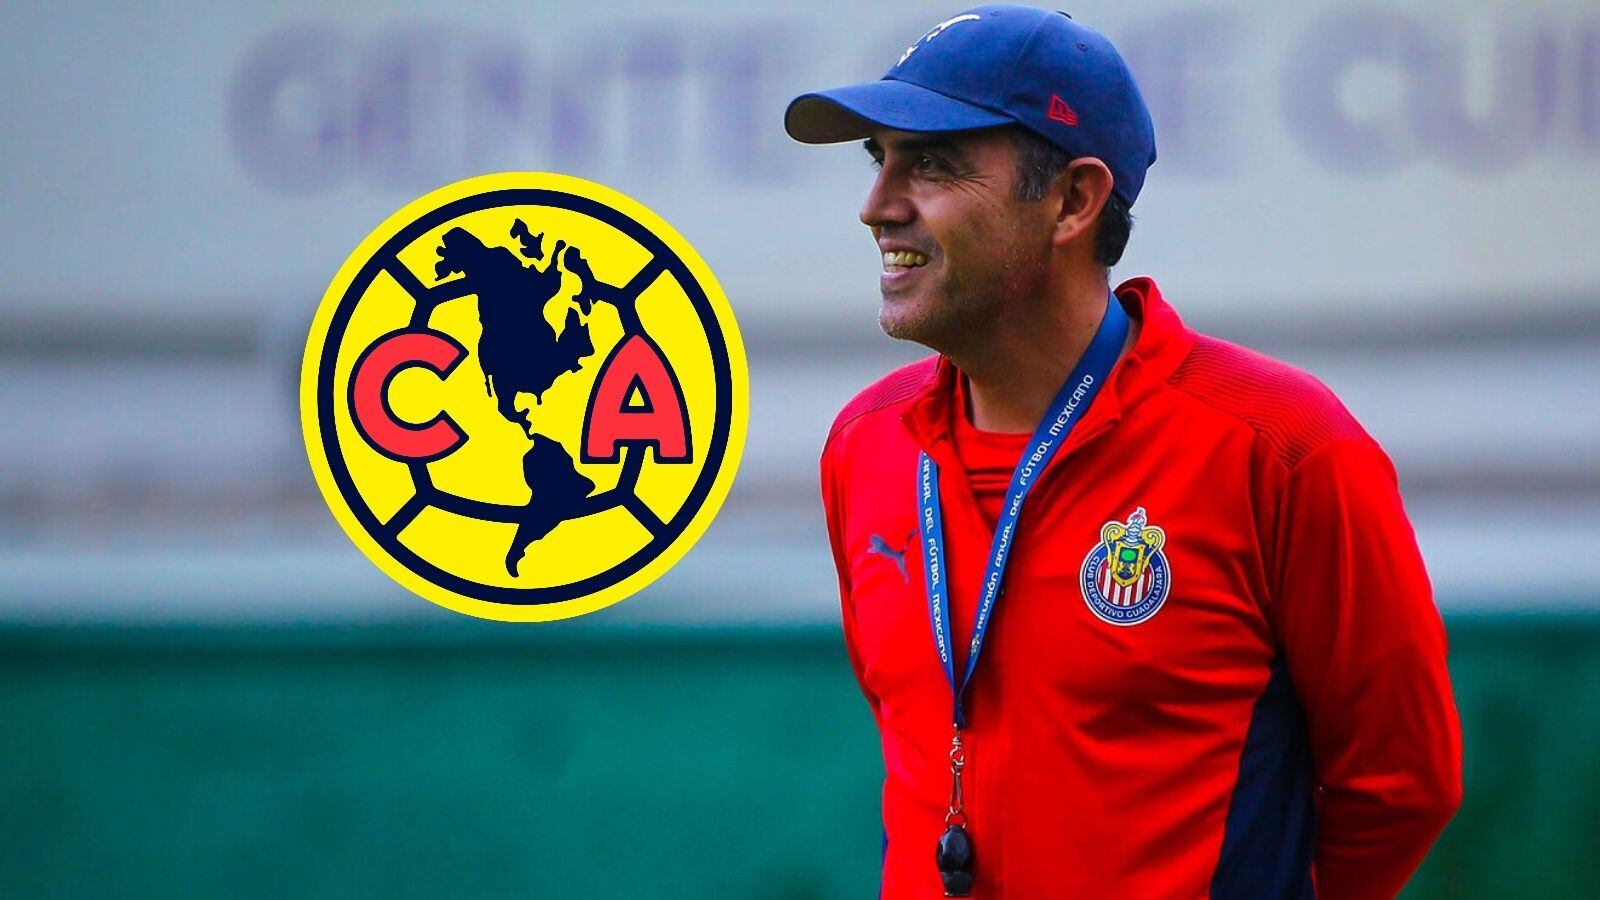 Ricardo Cadena understood, clean-up is coming, up to five Chivas players out after loss to América